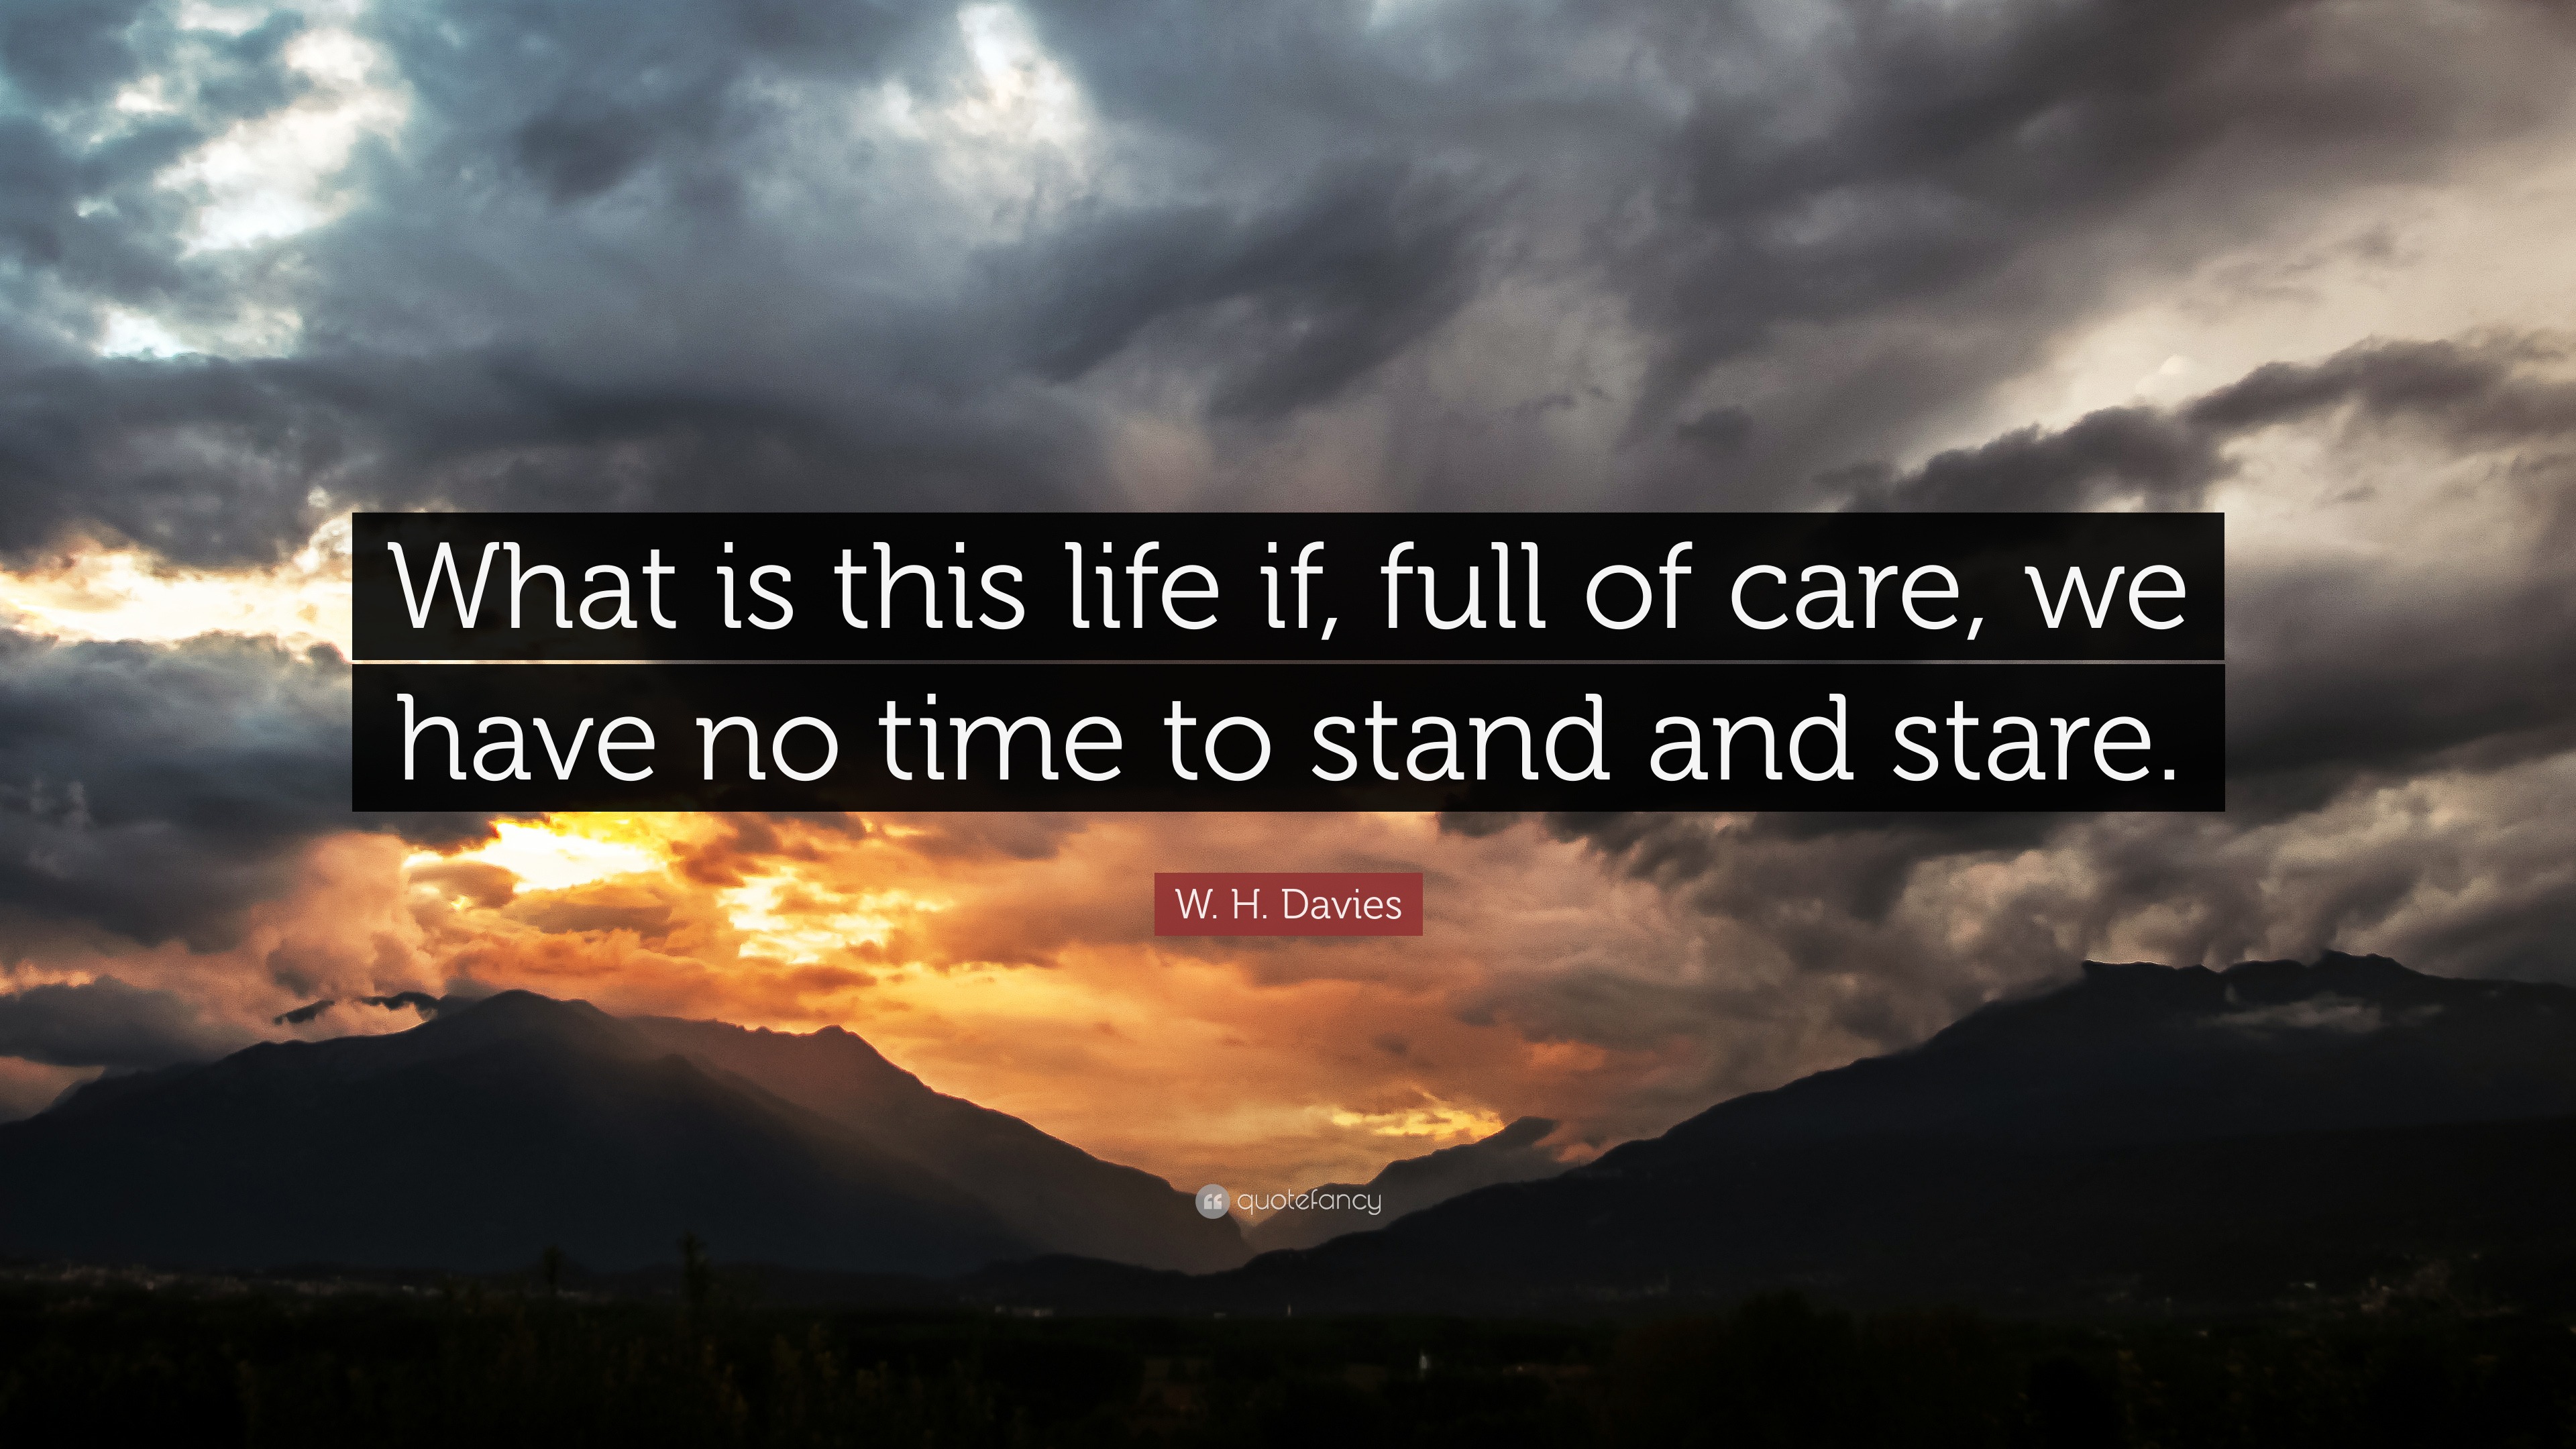 W. H. Davies Quote: “What is this life if, full of care, we have no